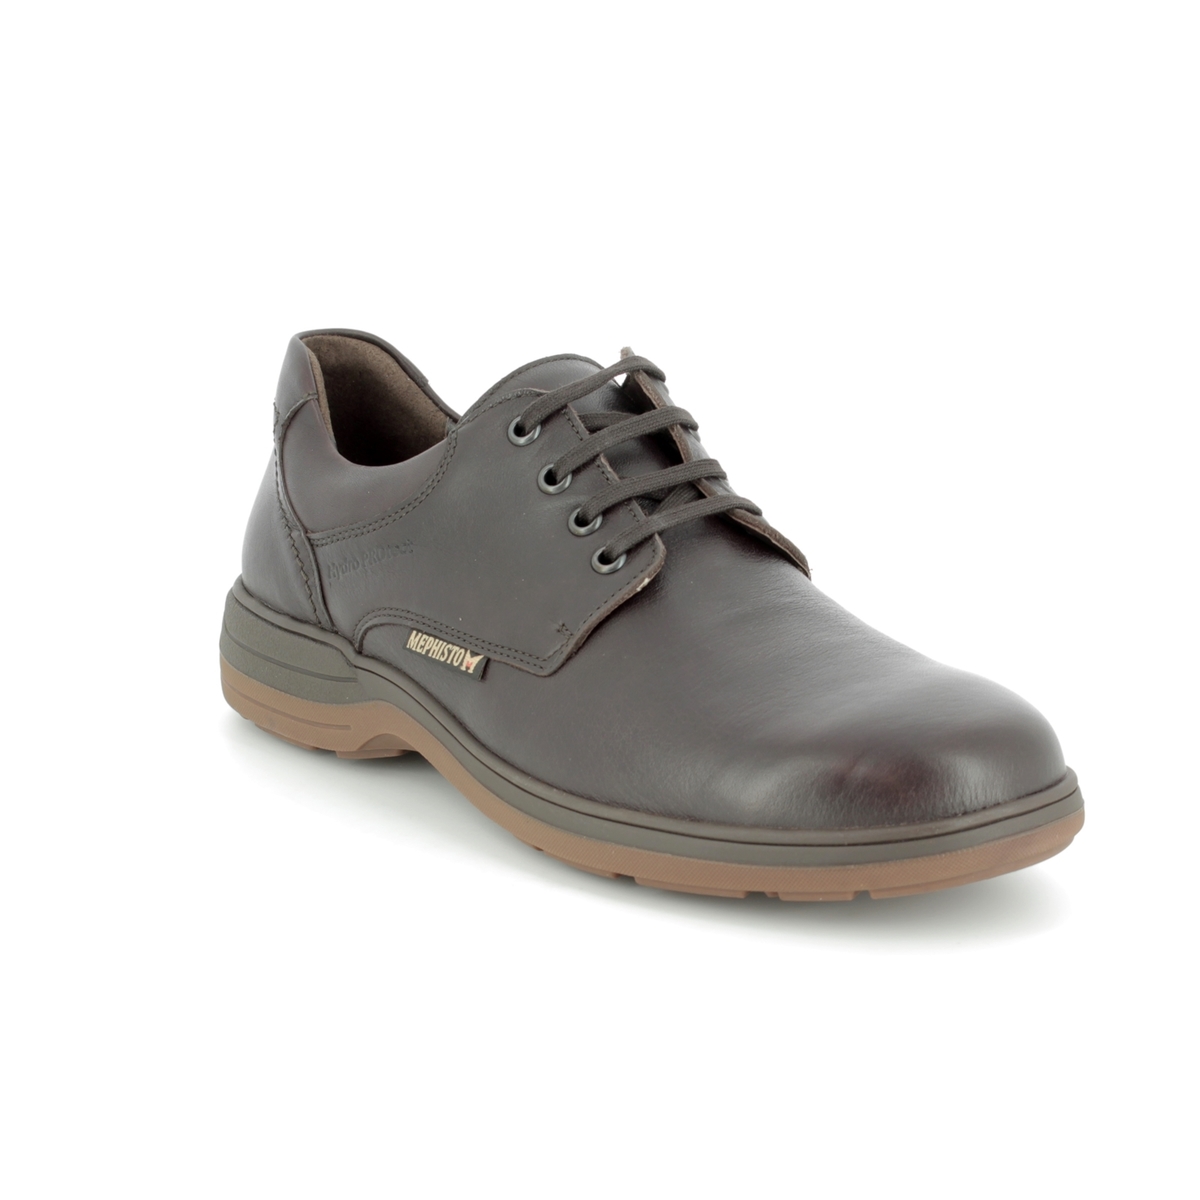 mephisto casual and dress shoes